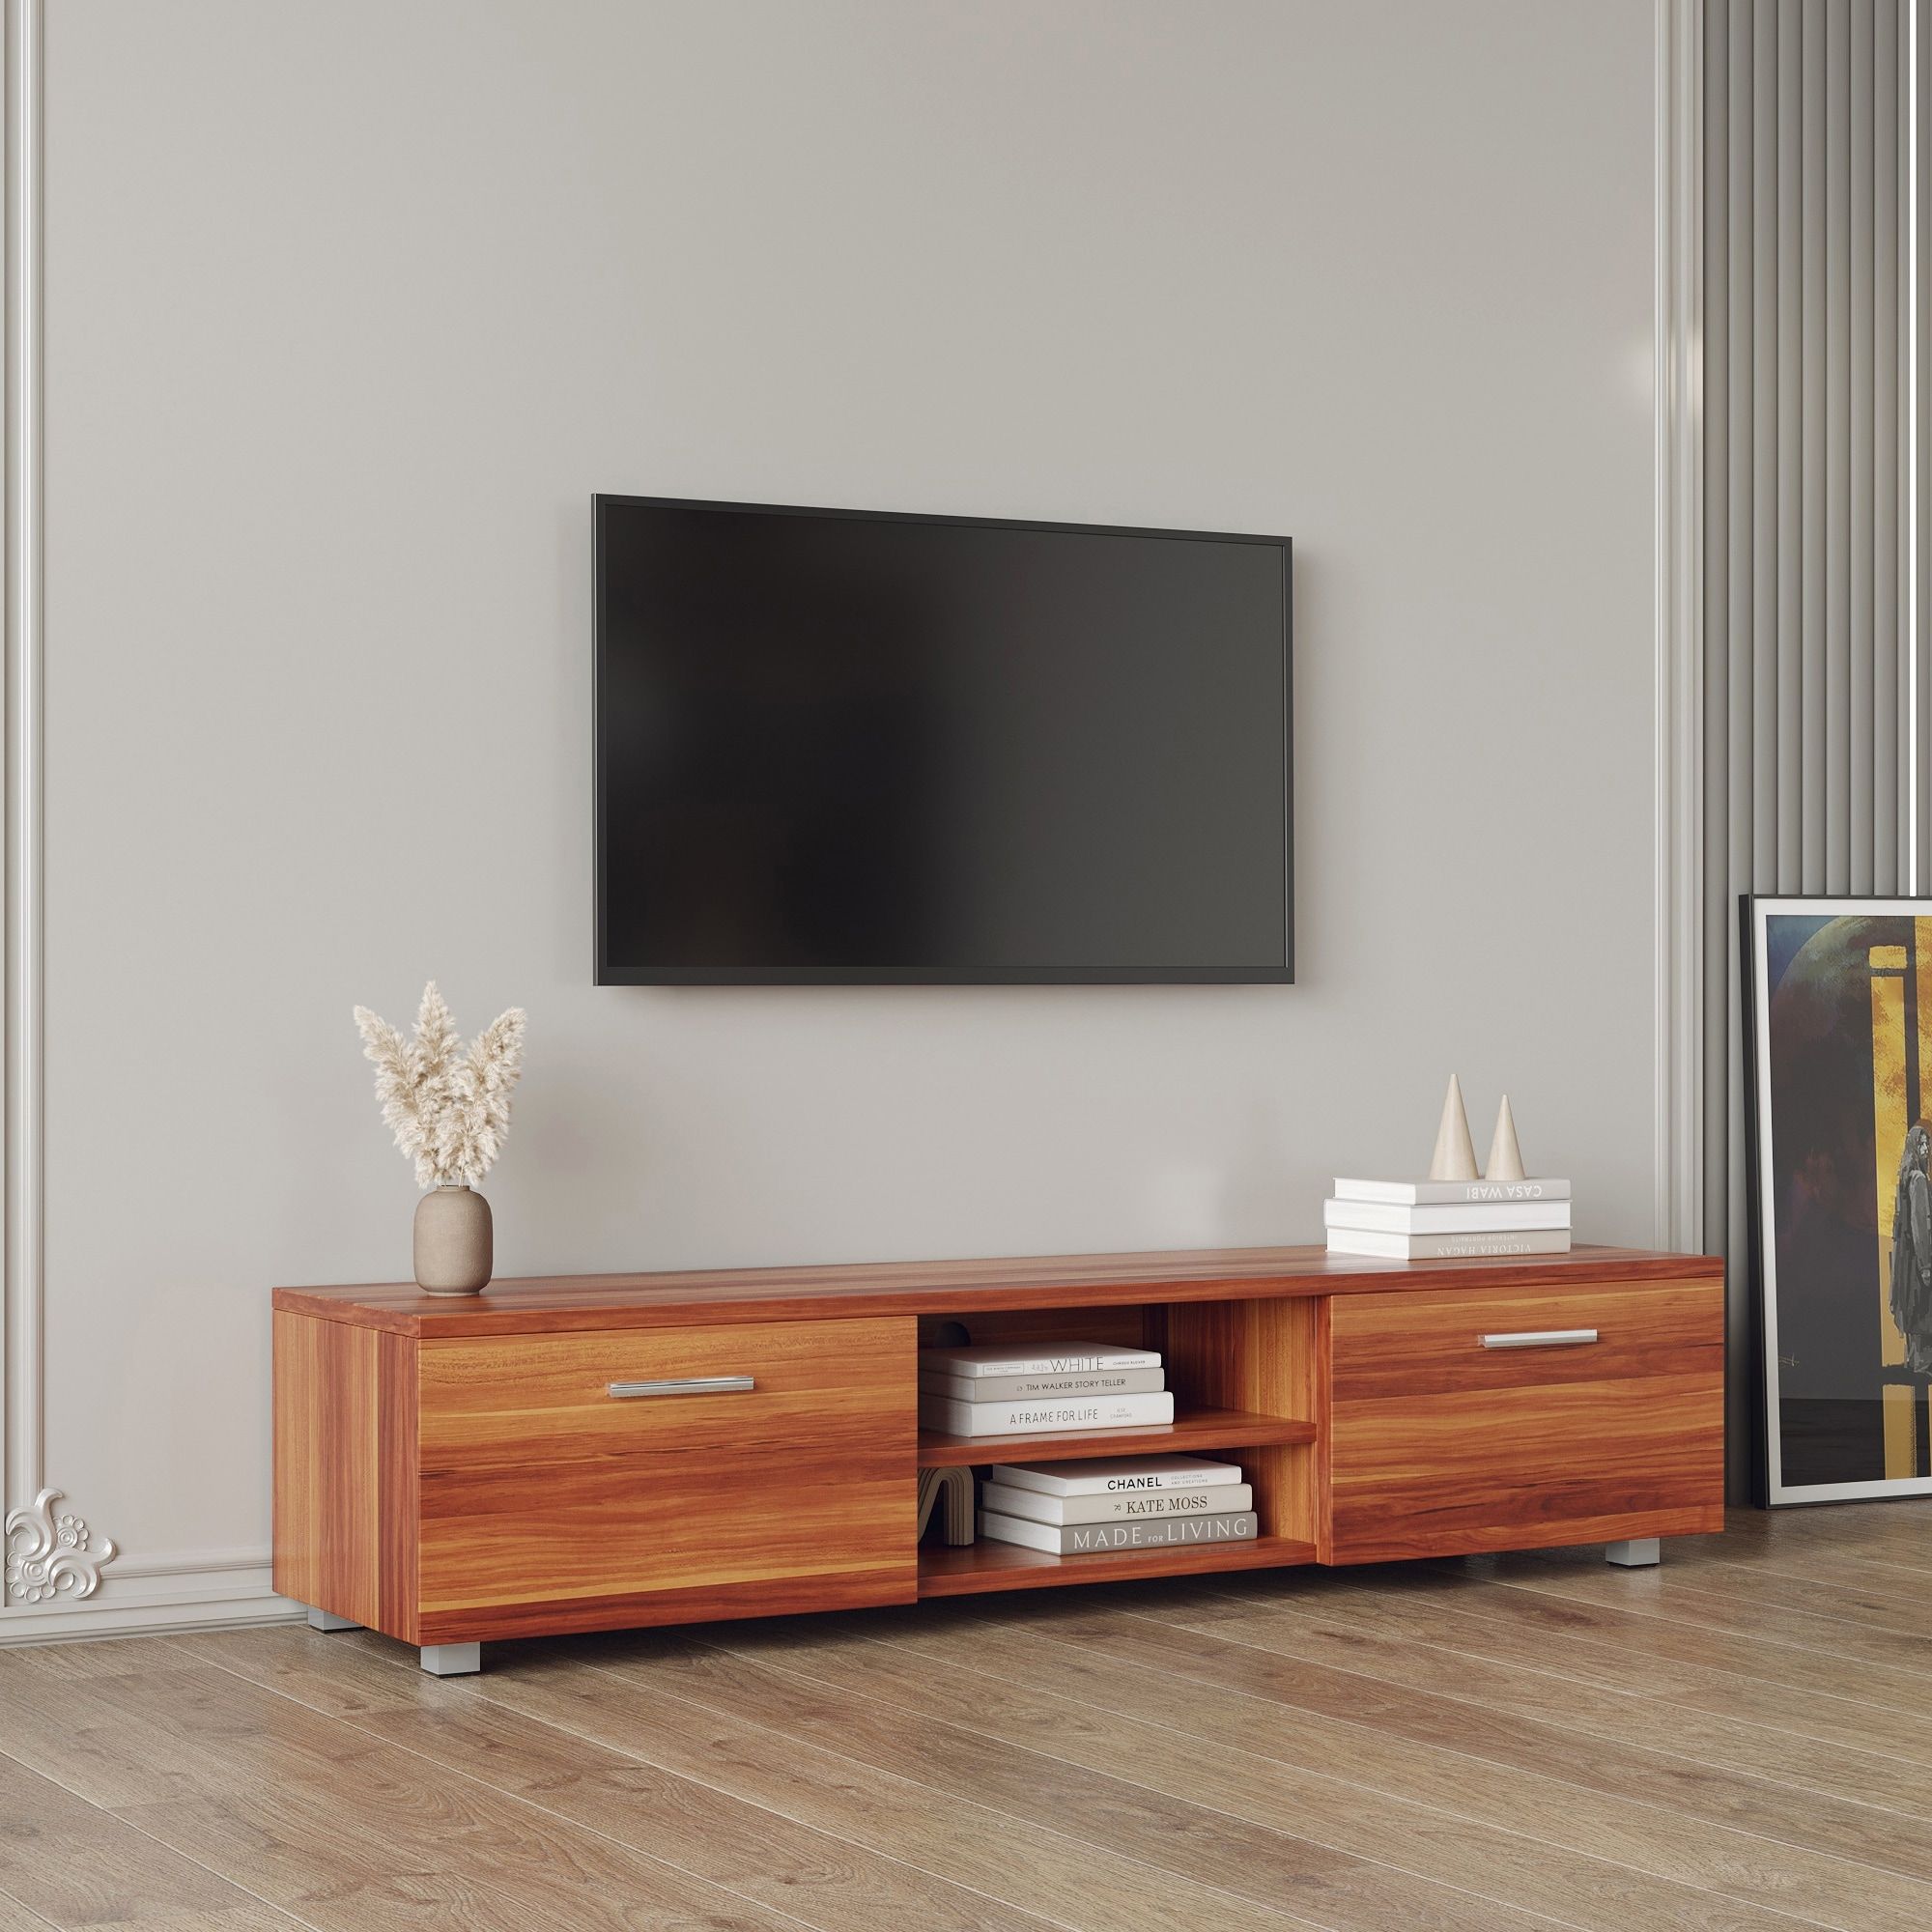 70" Tv Console Walnut Media Cabinets With Storage Cabinet&open Shelves – On  Sale – Bed Bath & Beyond – 38287723 For Entertainment Center With Storage Cabinet (View 7 of 15)